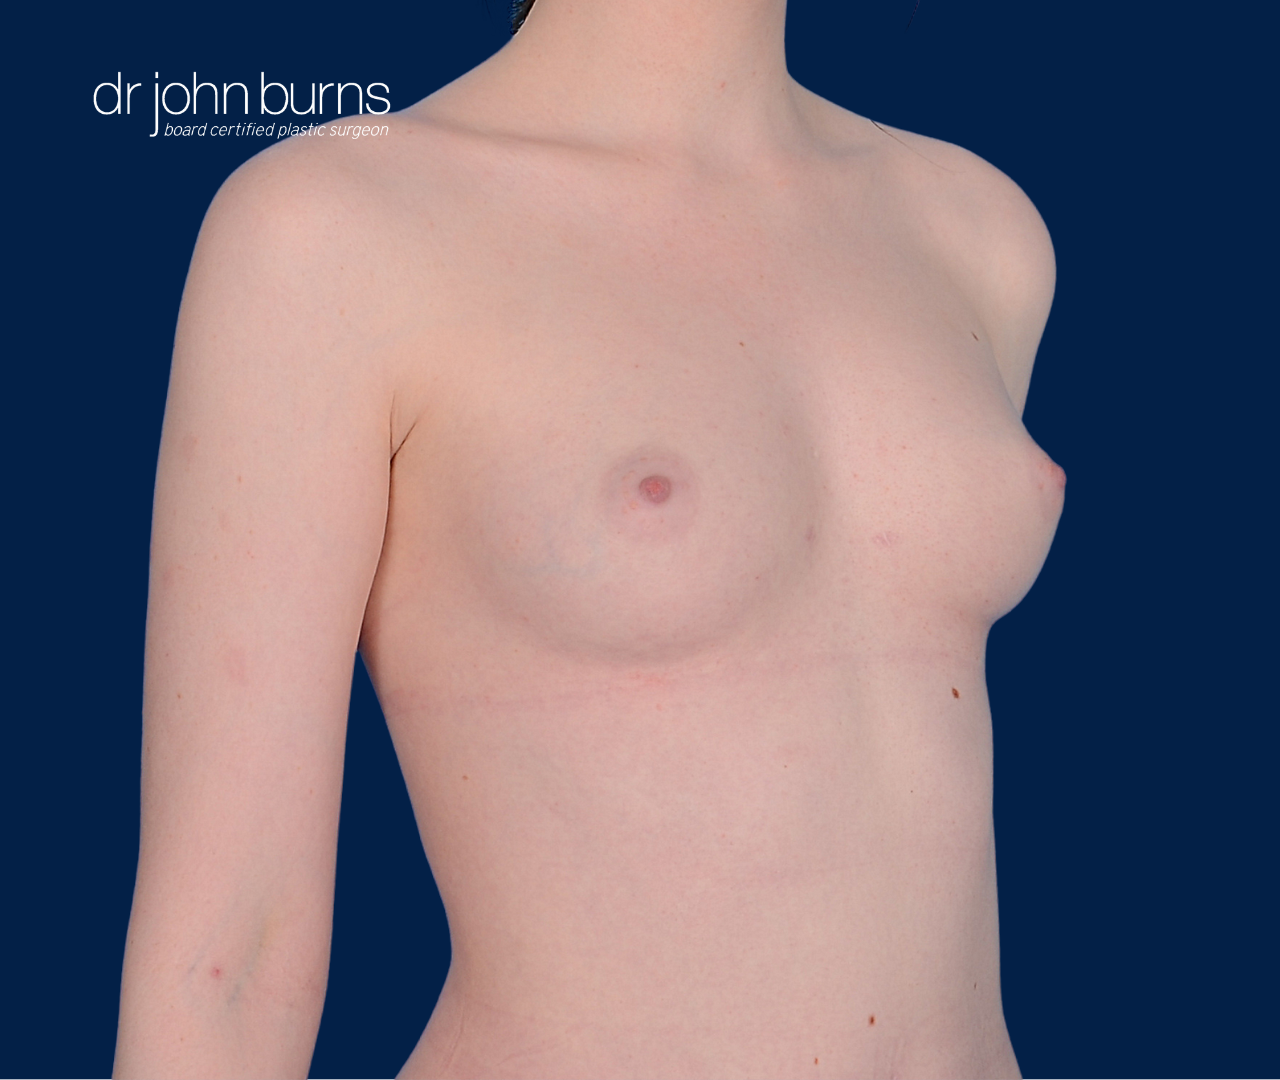 case 12- 45 degree view | after fat transfer to breast by top plastic surgeon, Dr. John Burns